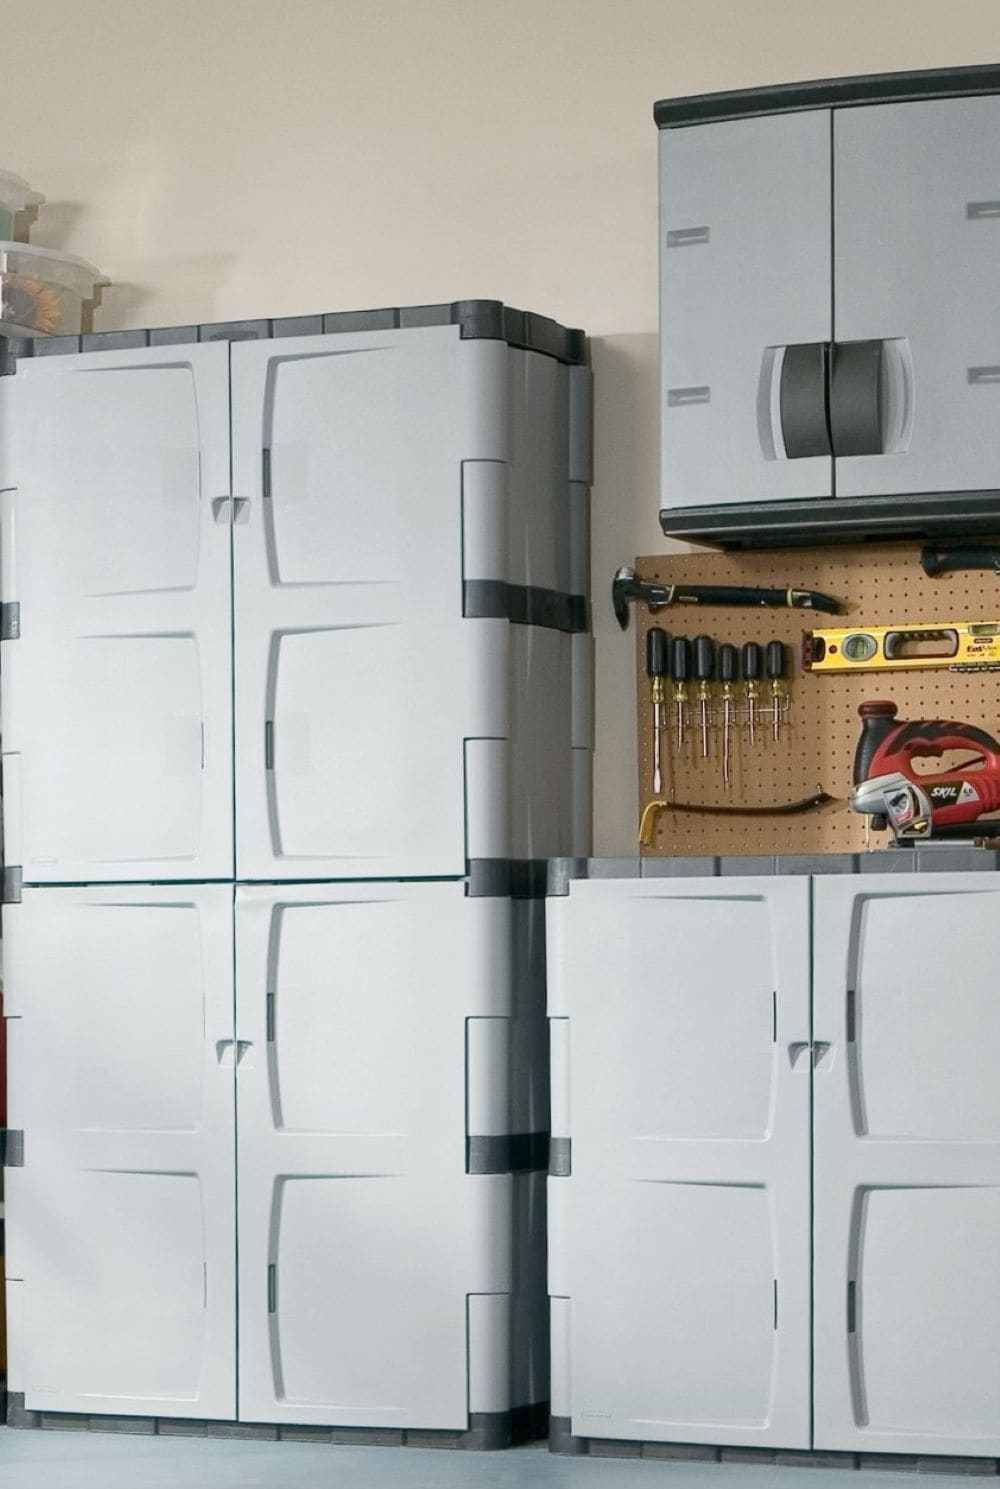 Rubbermaid Plastic Storage Cabinets at Material Handling Solutions Llc